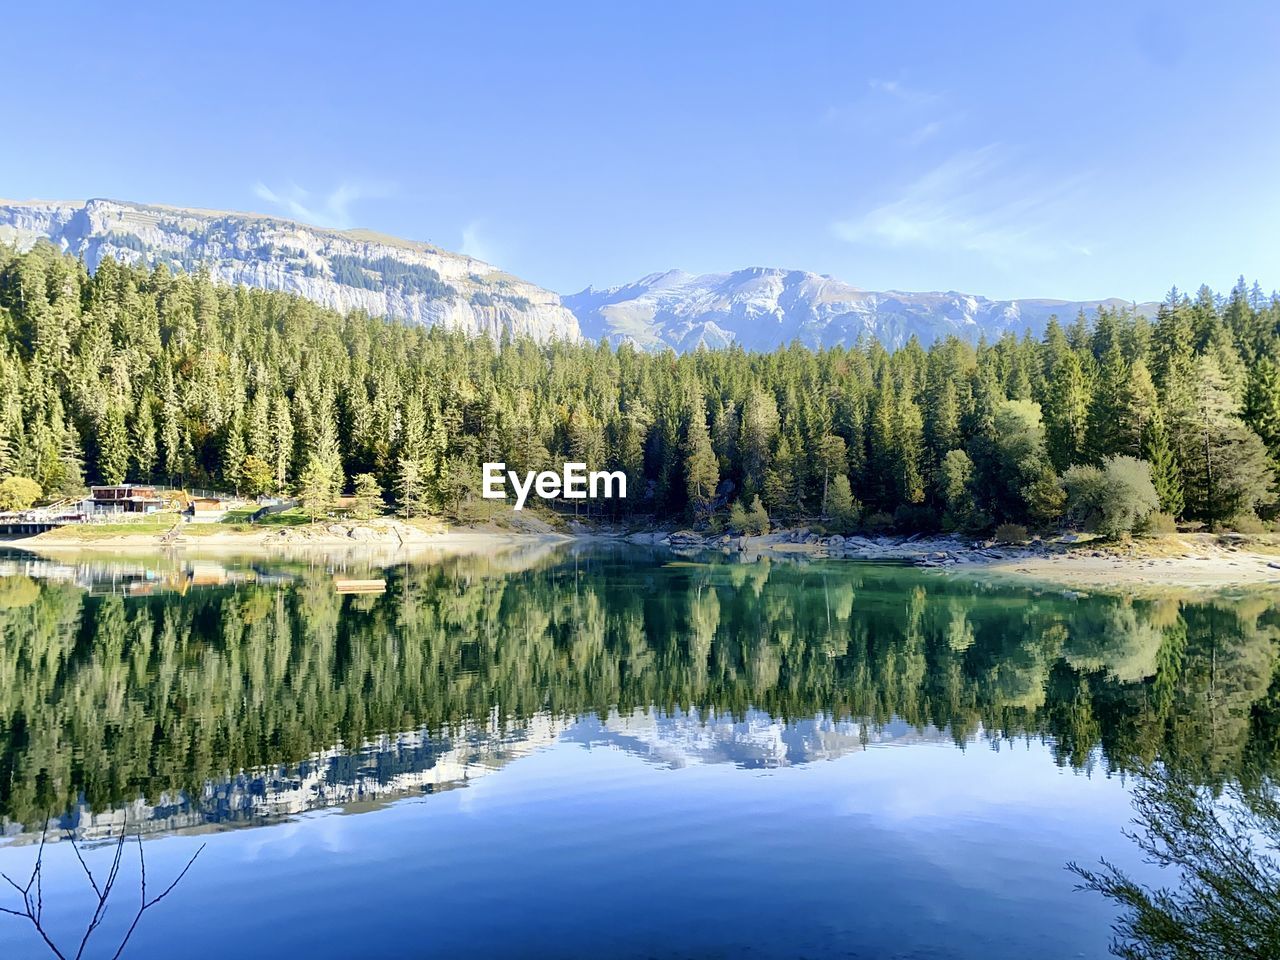 tree, reflection, scenics - nature, beauty in nature, water, plant, wilderness, lake, tranquil scene, tranquility, forest, mountain, pine tree, sky, coniferous tree, nature, pine woodland, pinaceae, environment, no people, land, landscape, non-urban scene, blue, woodland, mountain range, body of water, idyllic, day, snow, travel destinations, outdoors, remote, green, travel, cold temperature, reservoir, meadow, cloud, national park, winter